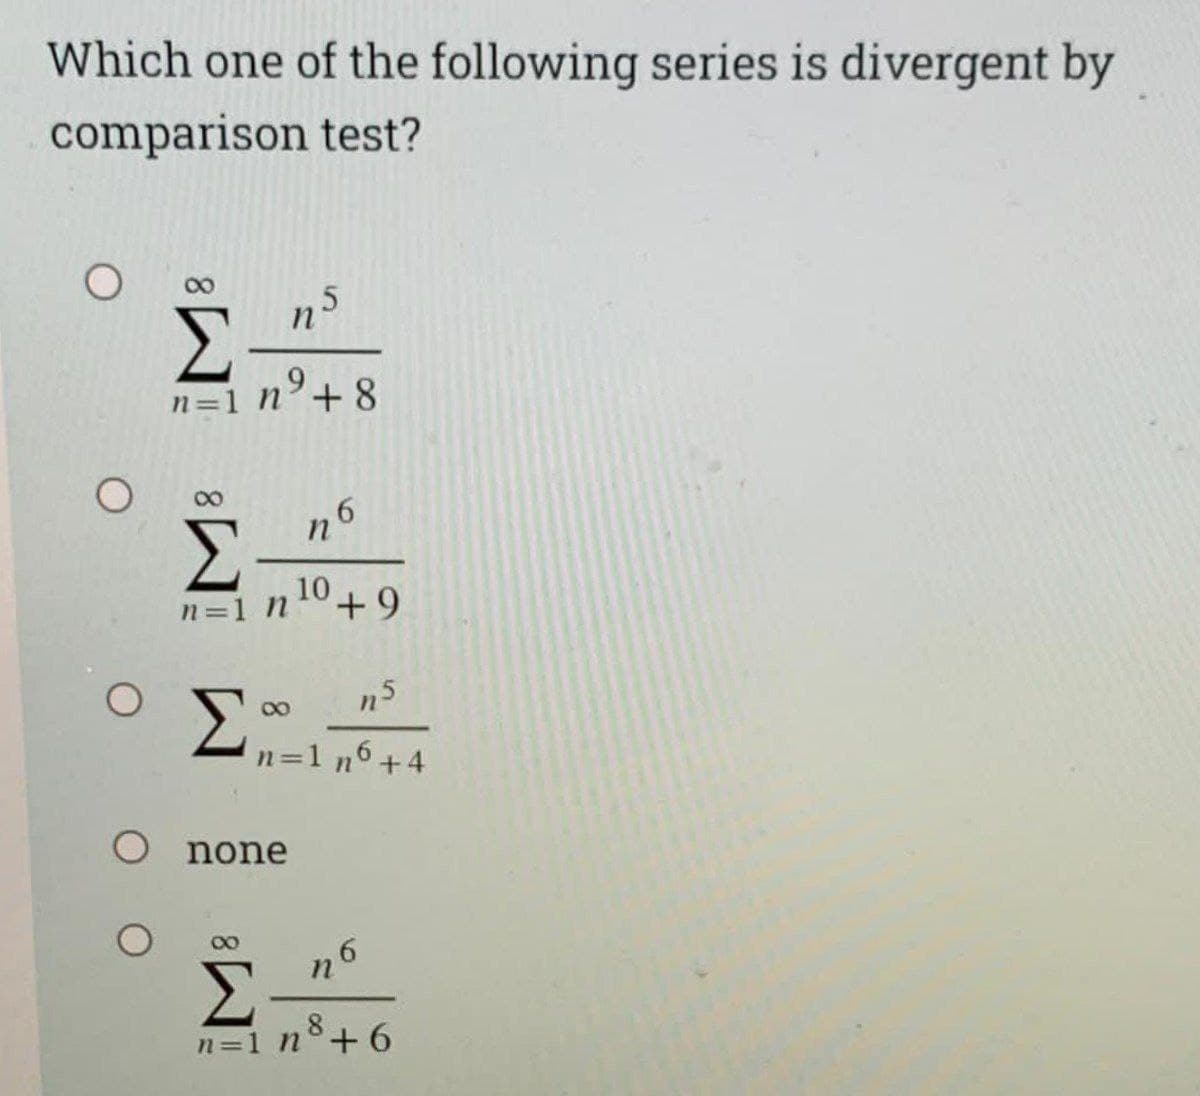 Which one of the following series is divergent by
comparison test?
,5
n'
n=1 n²+8
8,
n6
10+9
n=1 n
Σ,
n=1 n6+4
O none
n
Σ
n=1 n°+6
8.
